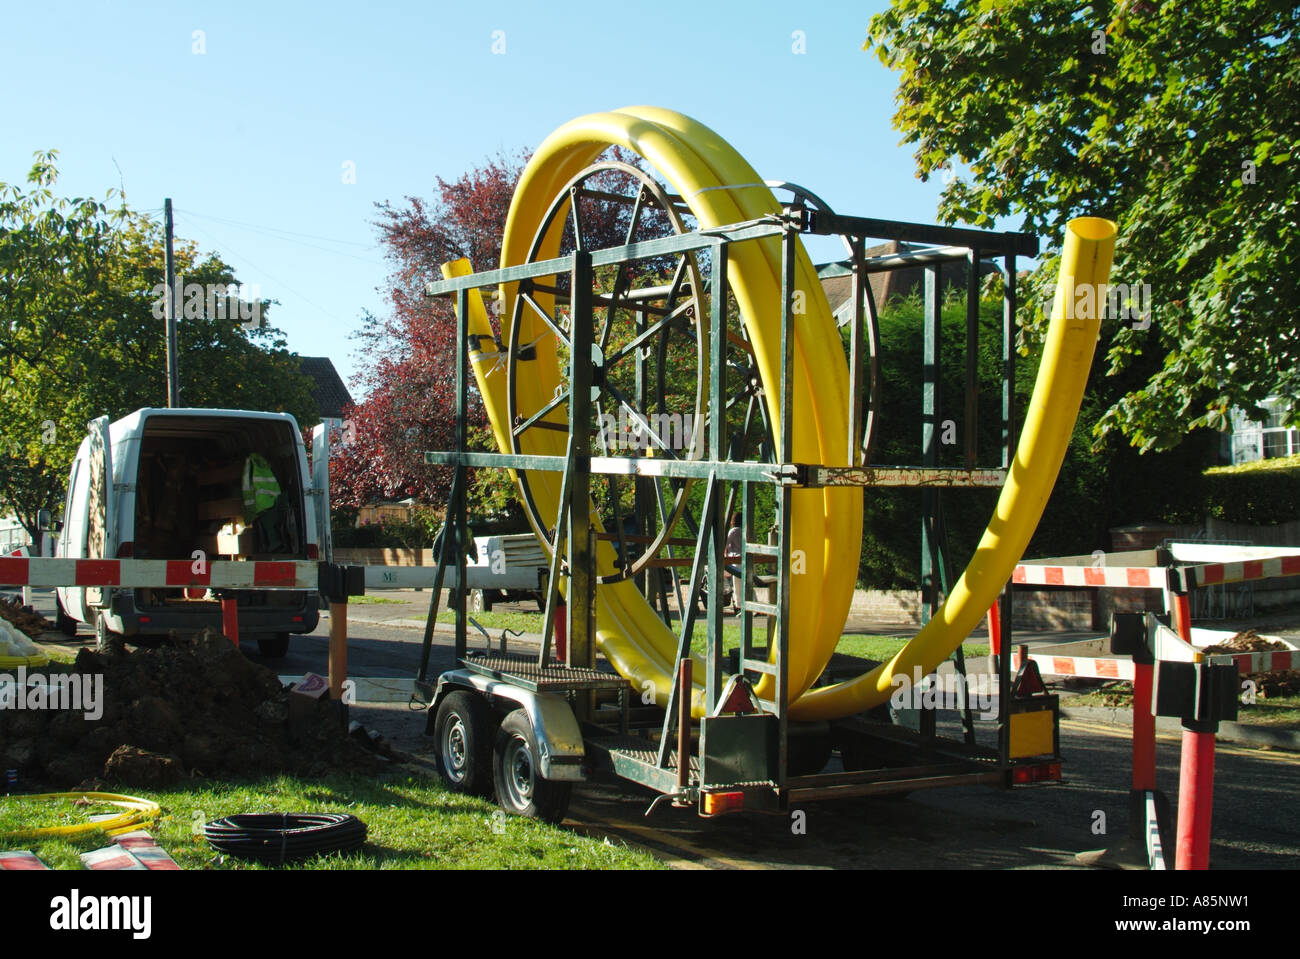 Gas main pipe laying road works in progress with large coil of yellow flexible plastic pipe on trailer Essex England UK with copy space Stock Photo